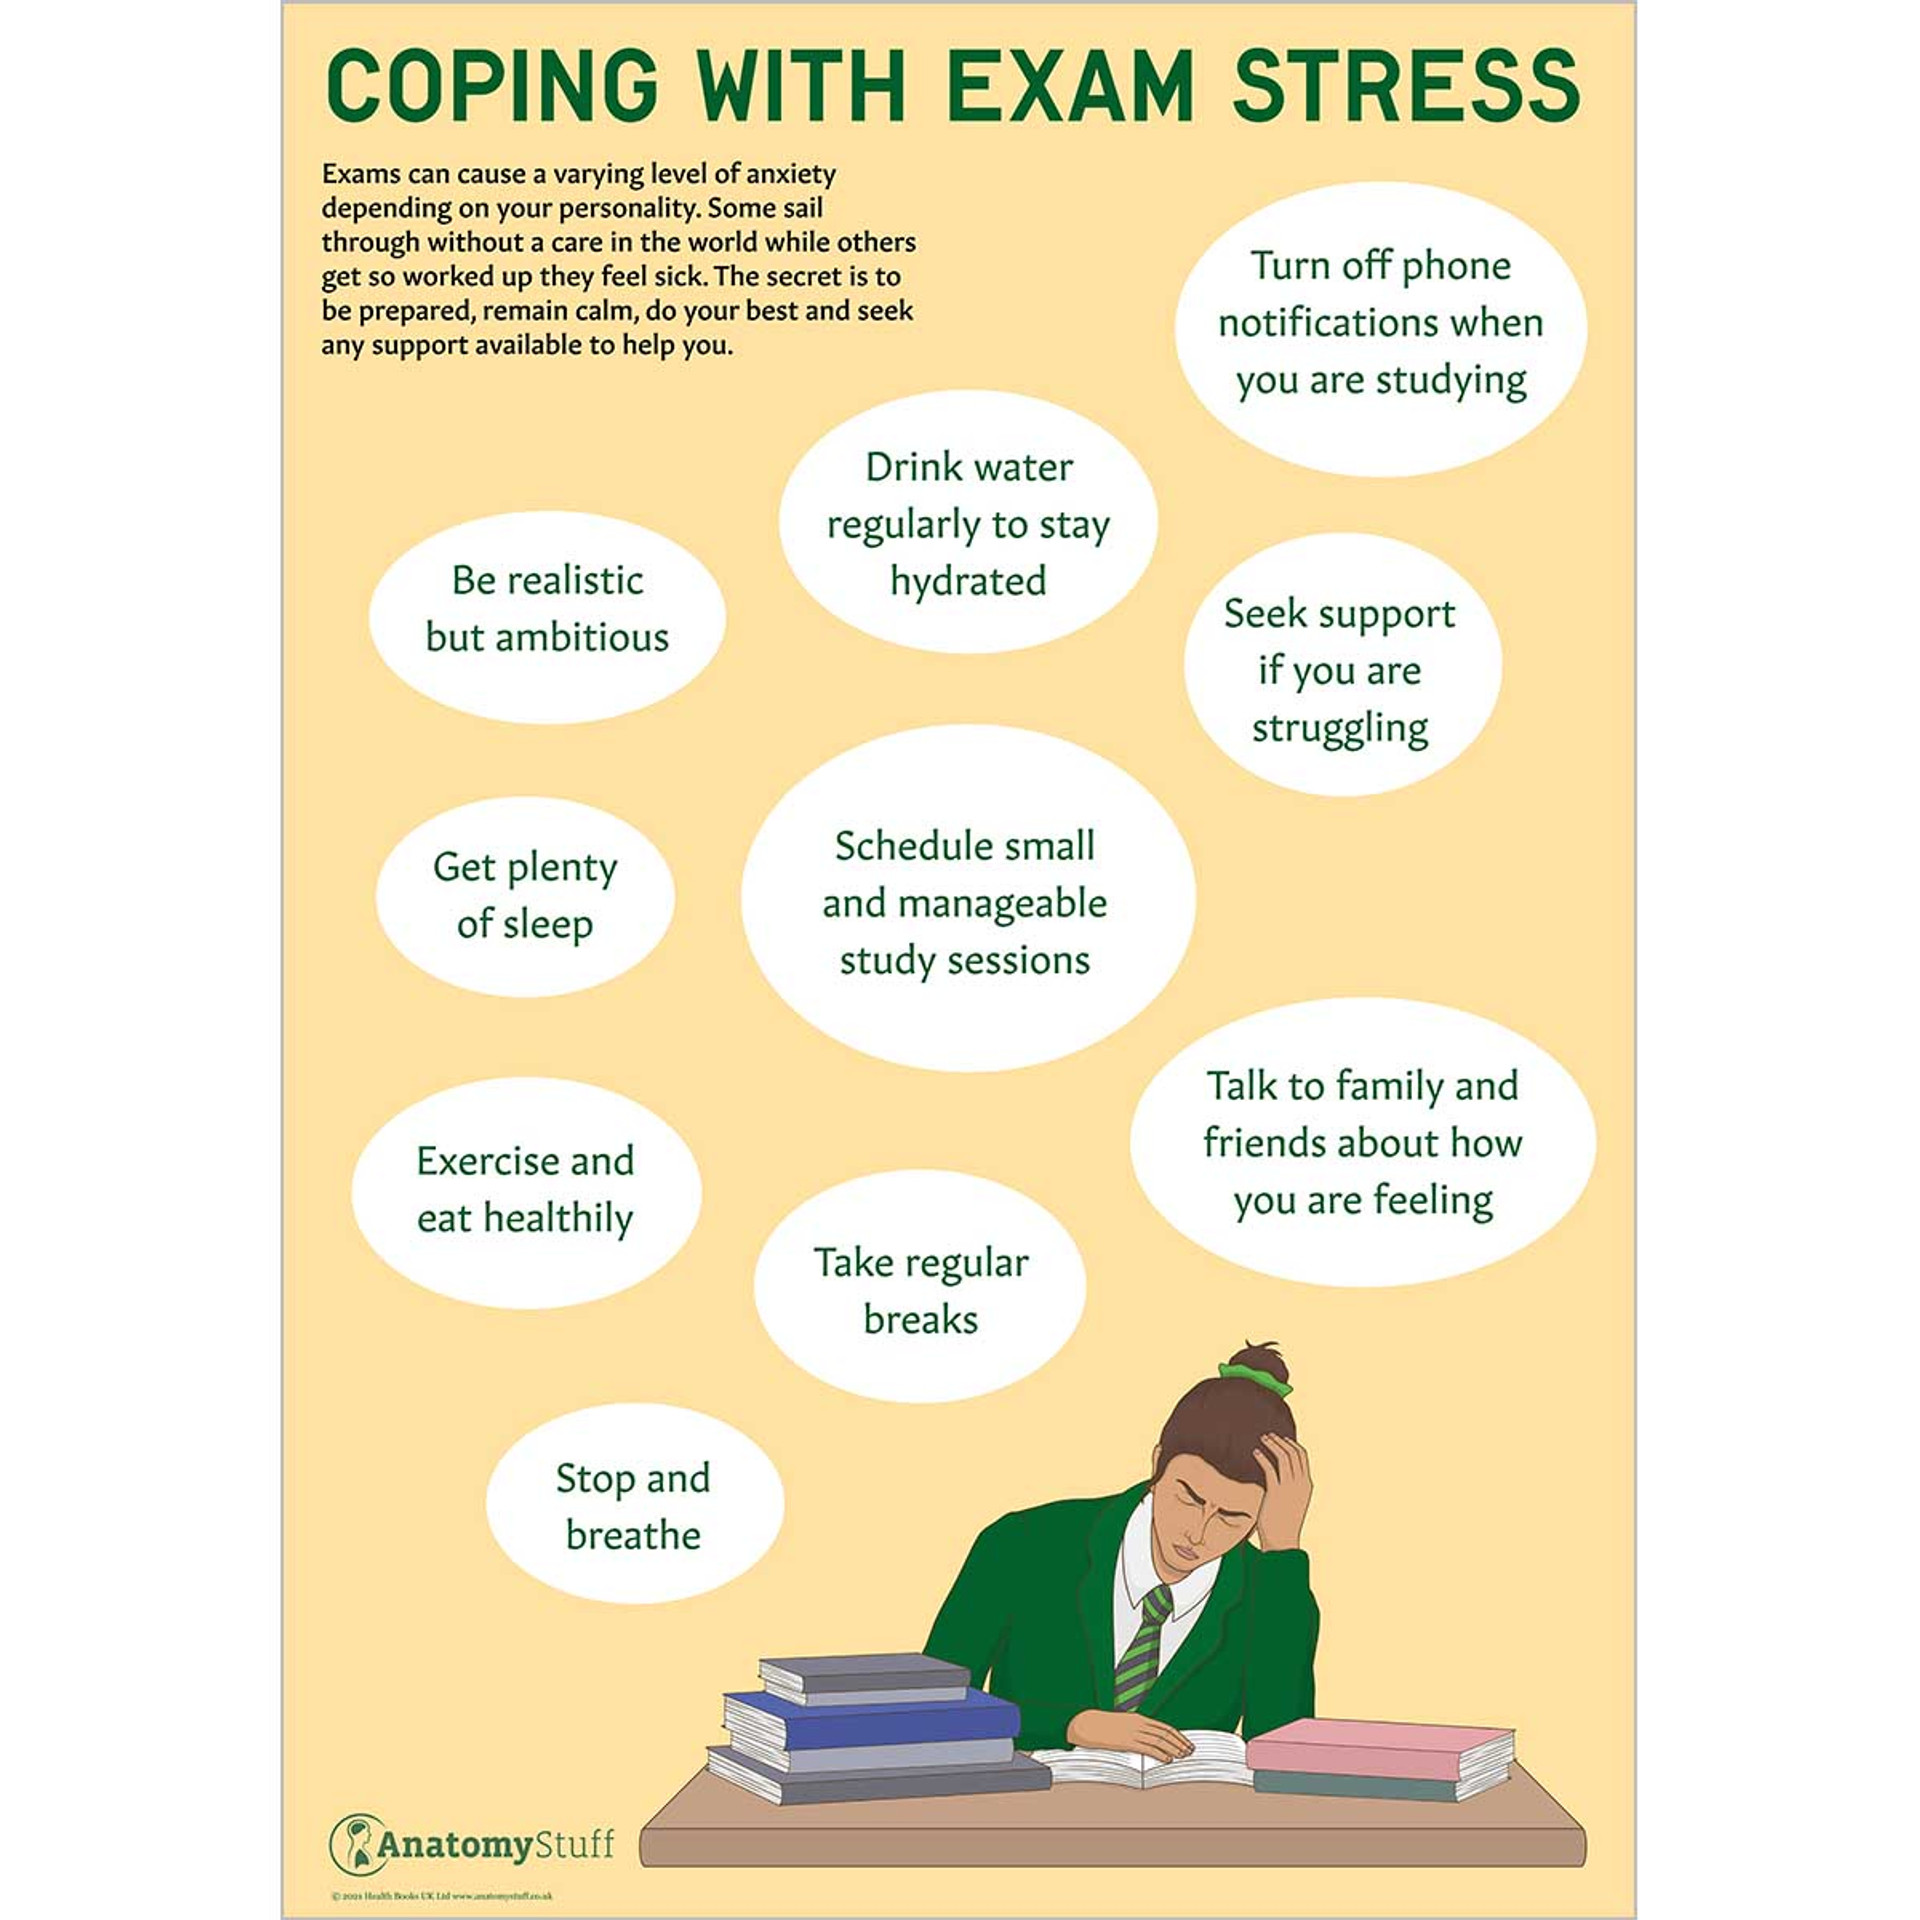 stress coping strategies and academic achievement in teacher education students